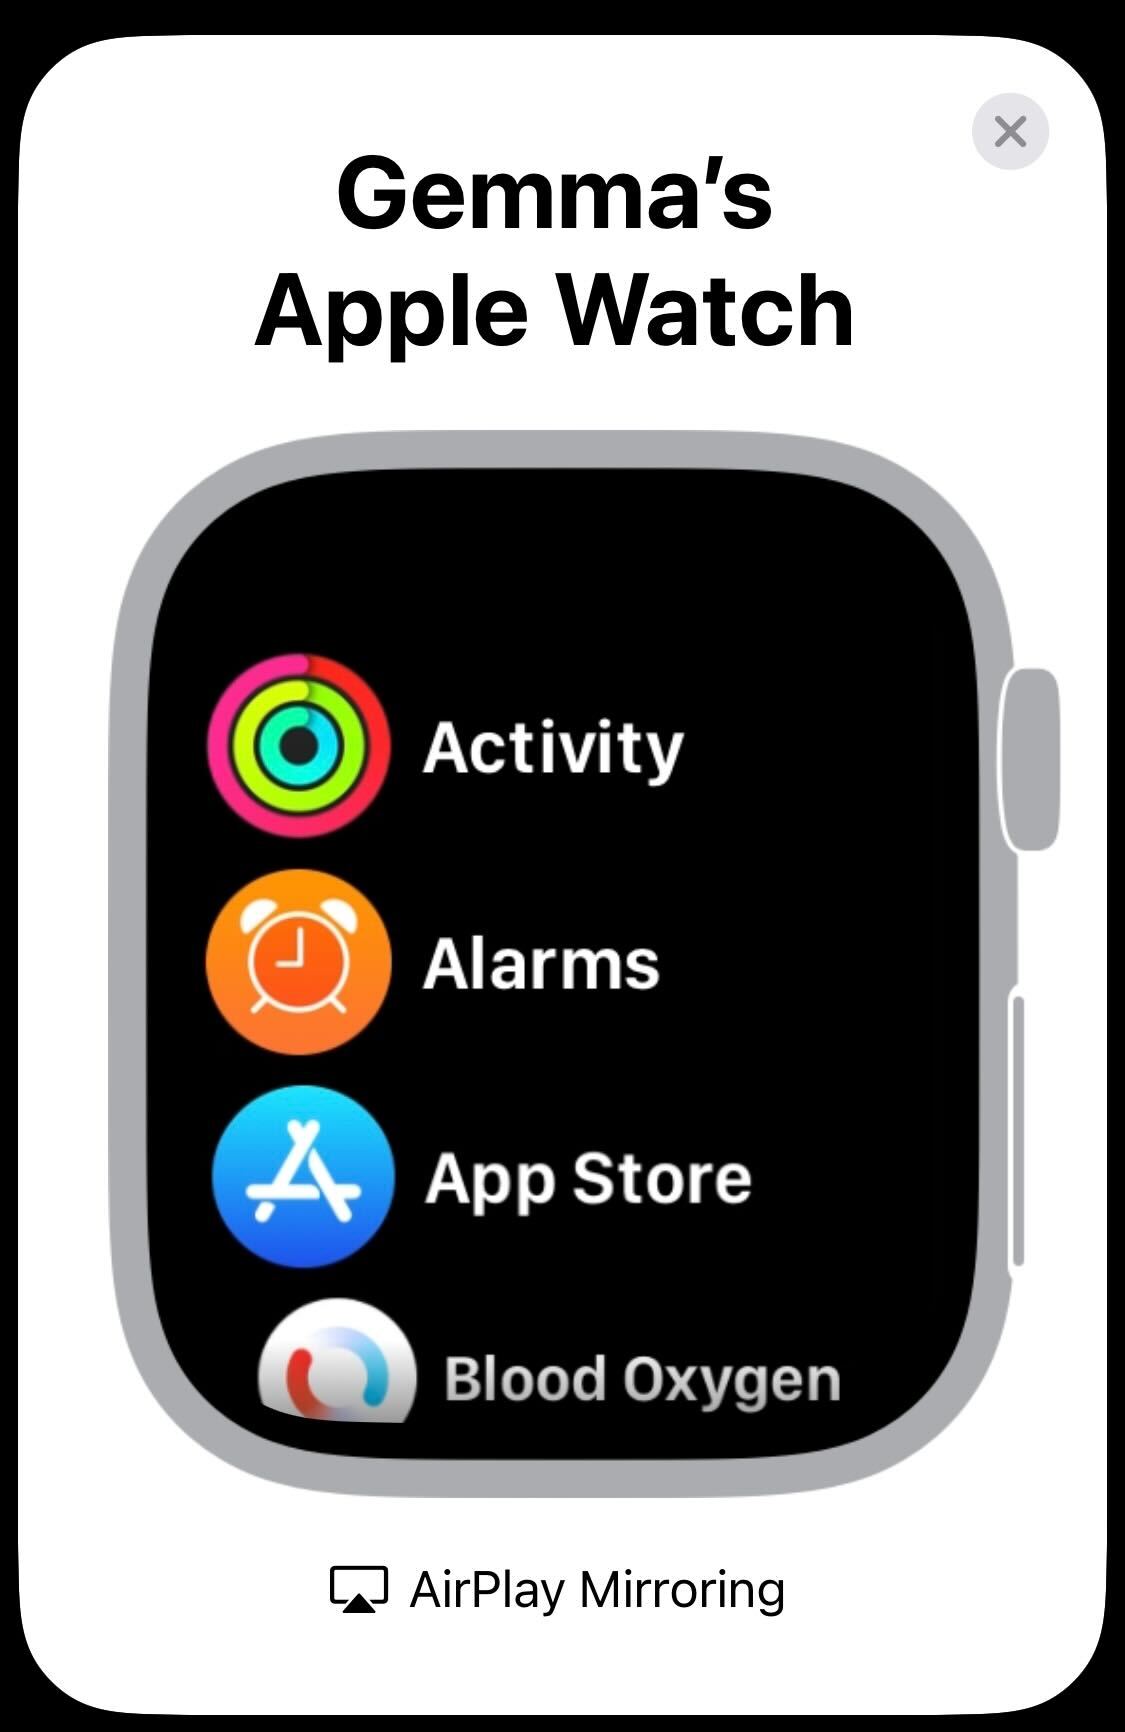 Apple Watch toggle feature